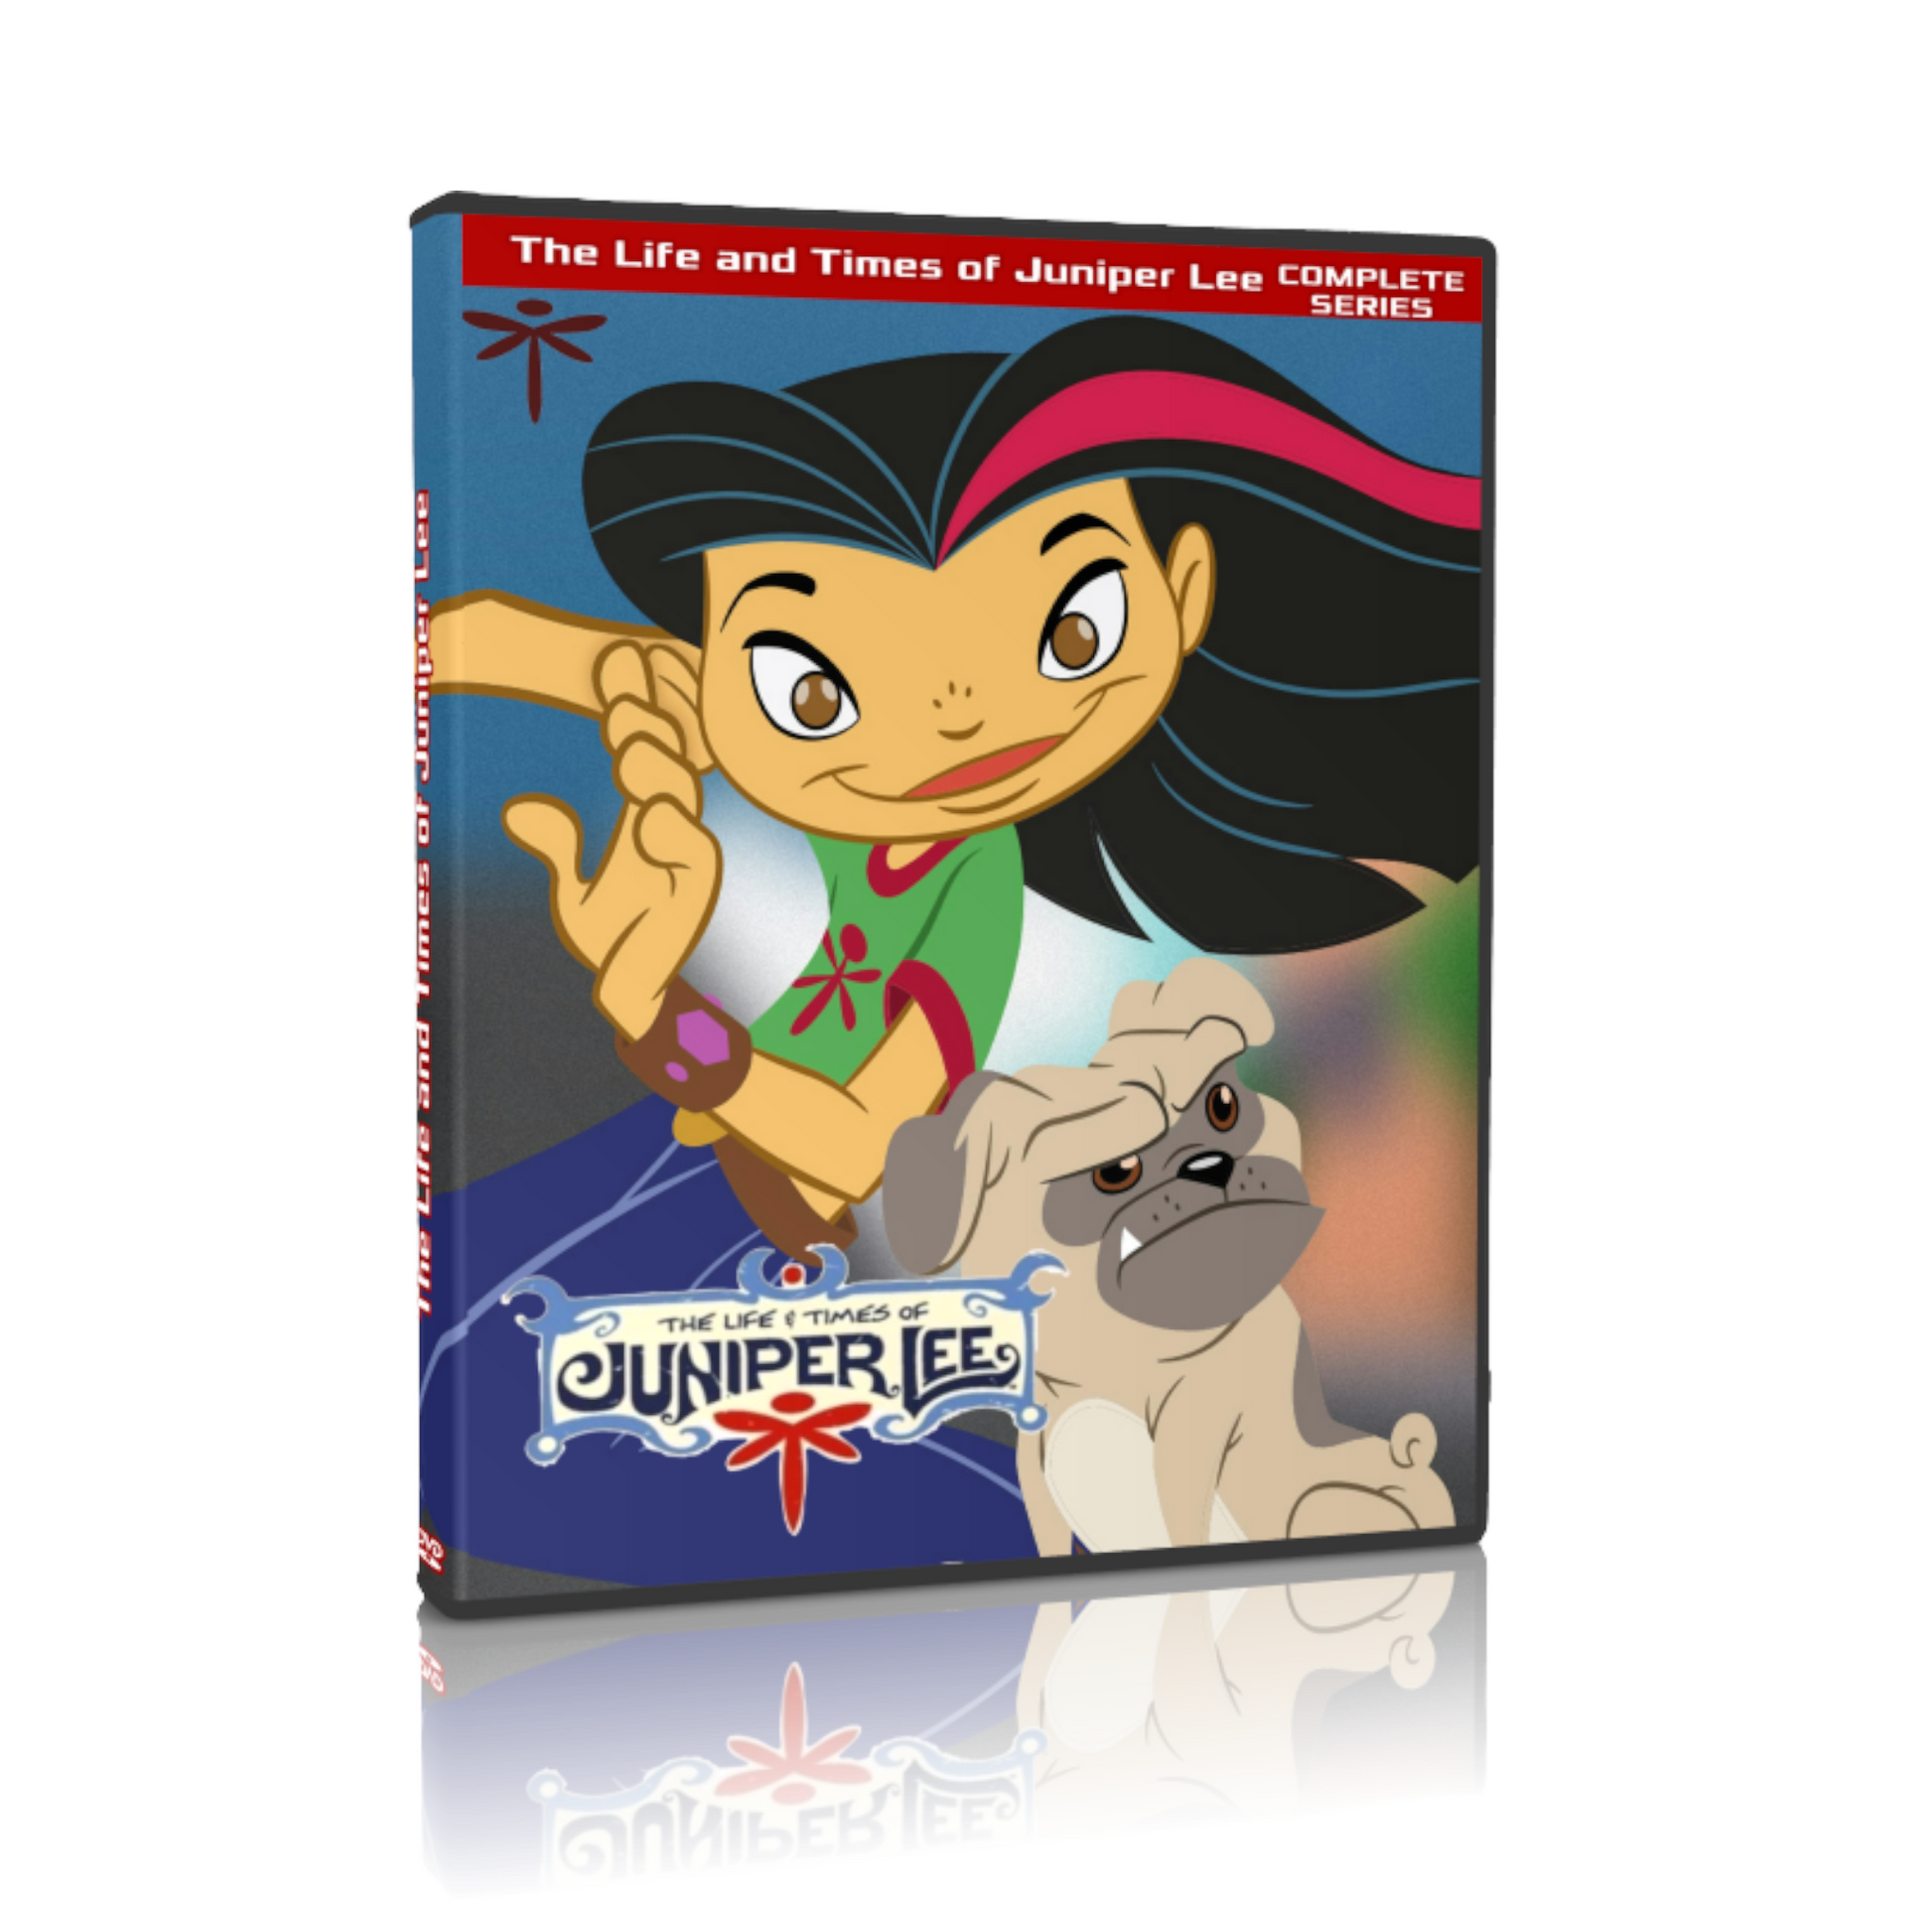 The Life and Times of Juniper Lee Complete Series DVD Set - RetroAnimation 